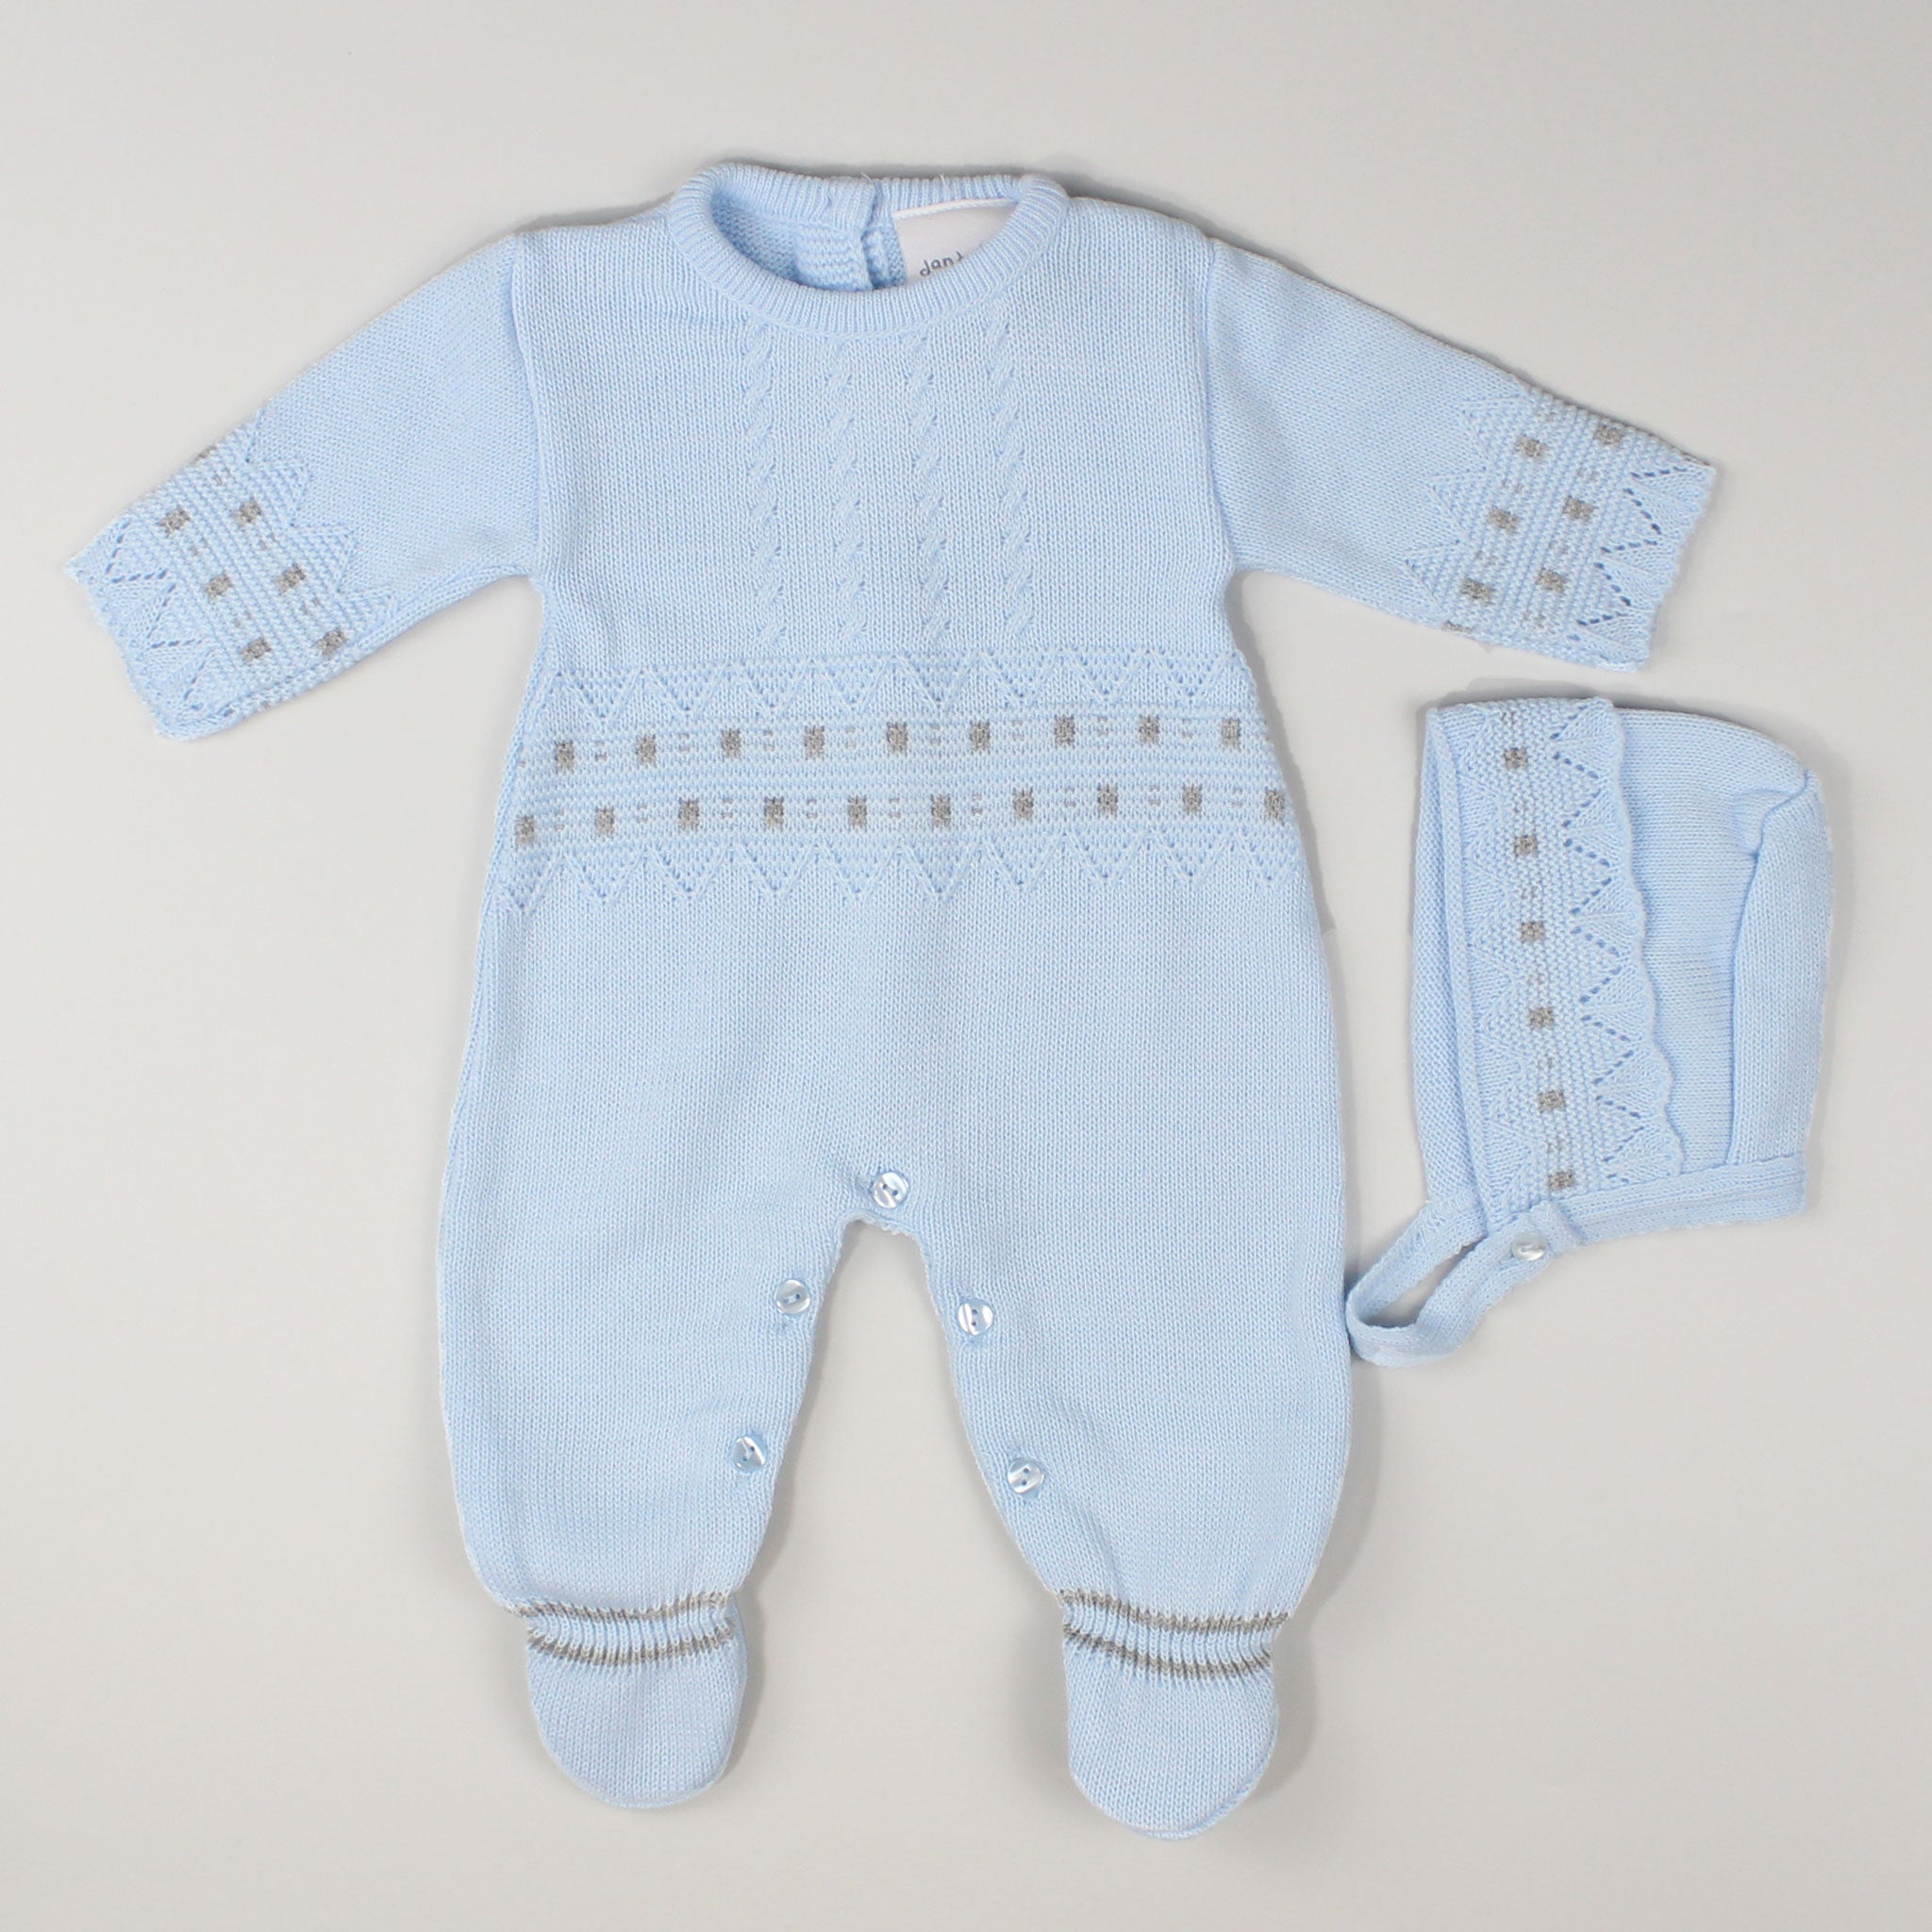 newborn baby boy knitted outfit